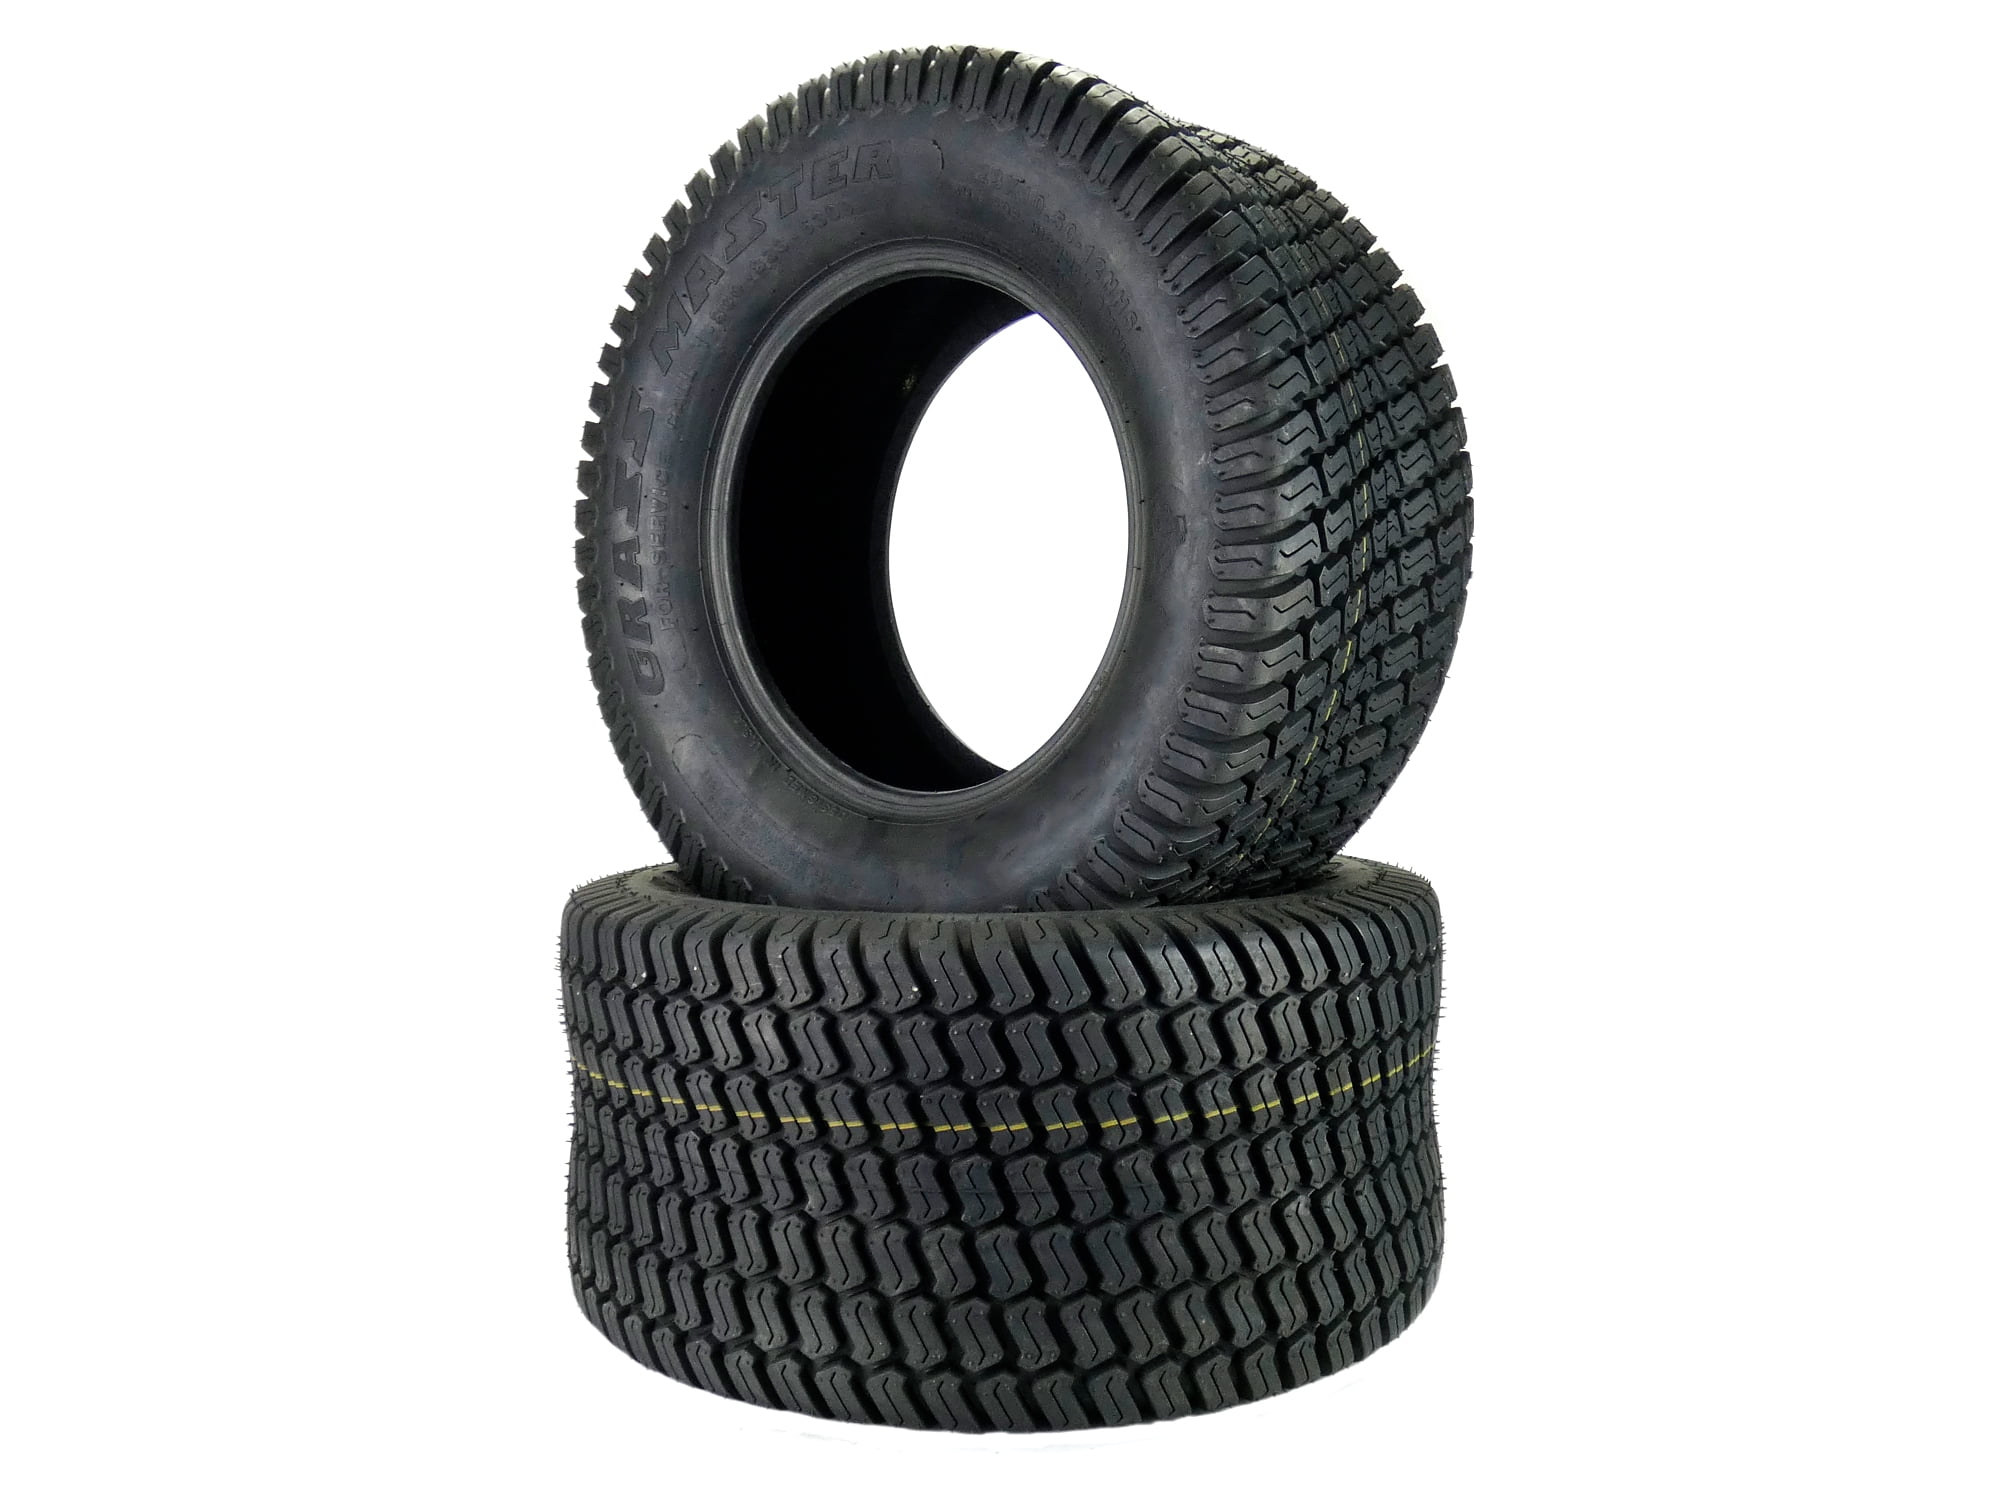 2 23x10.50-12 23/10.50-12 Riding Lawn Mower Garden Tractor Turf TIRES P332 4ply